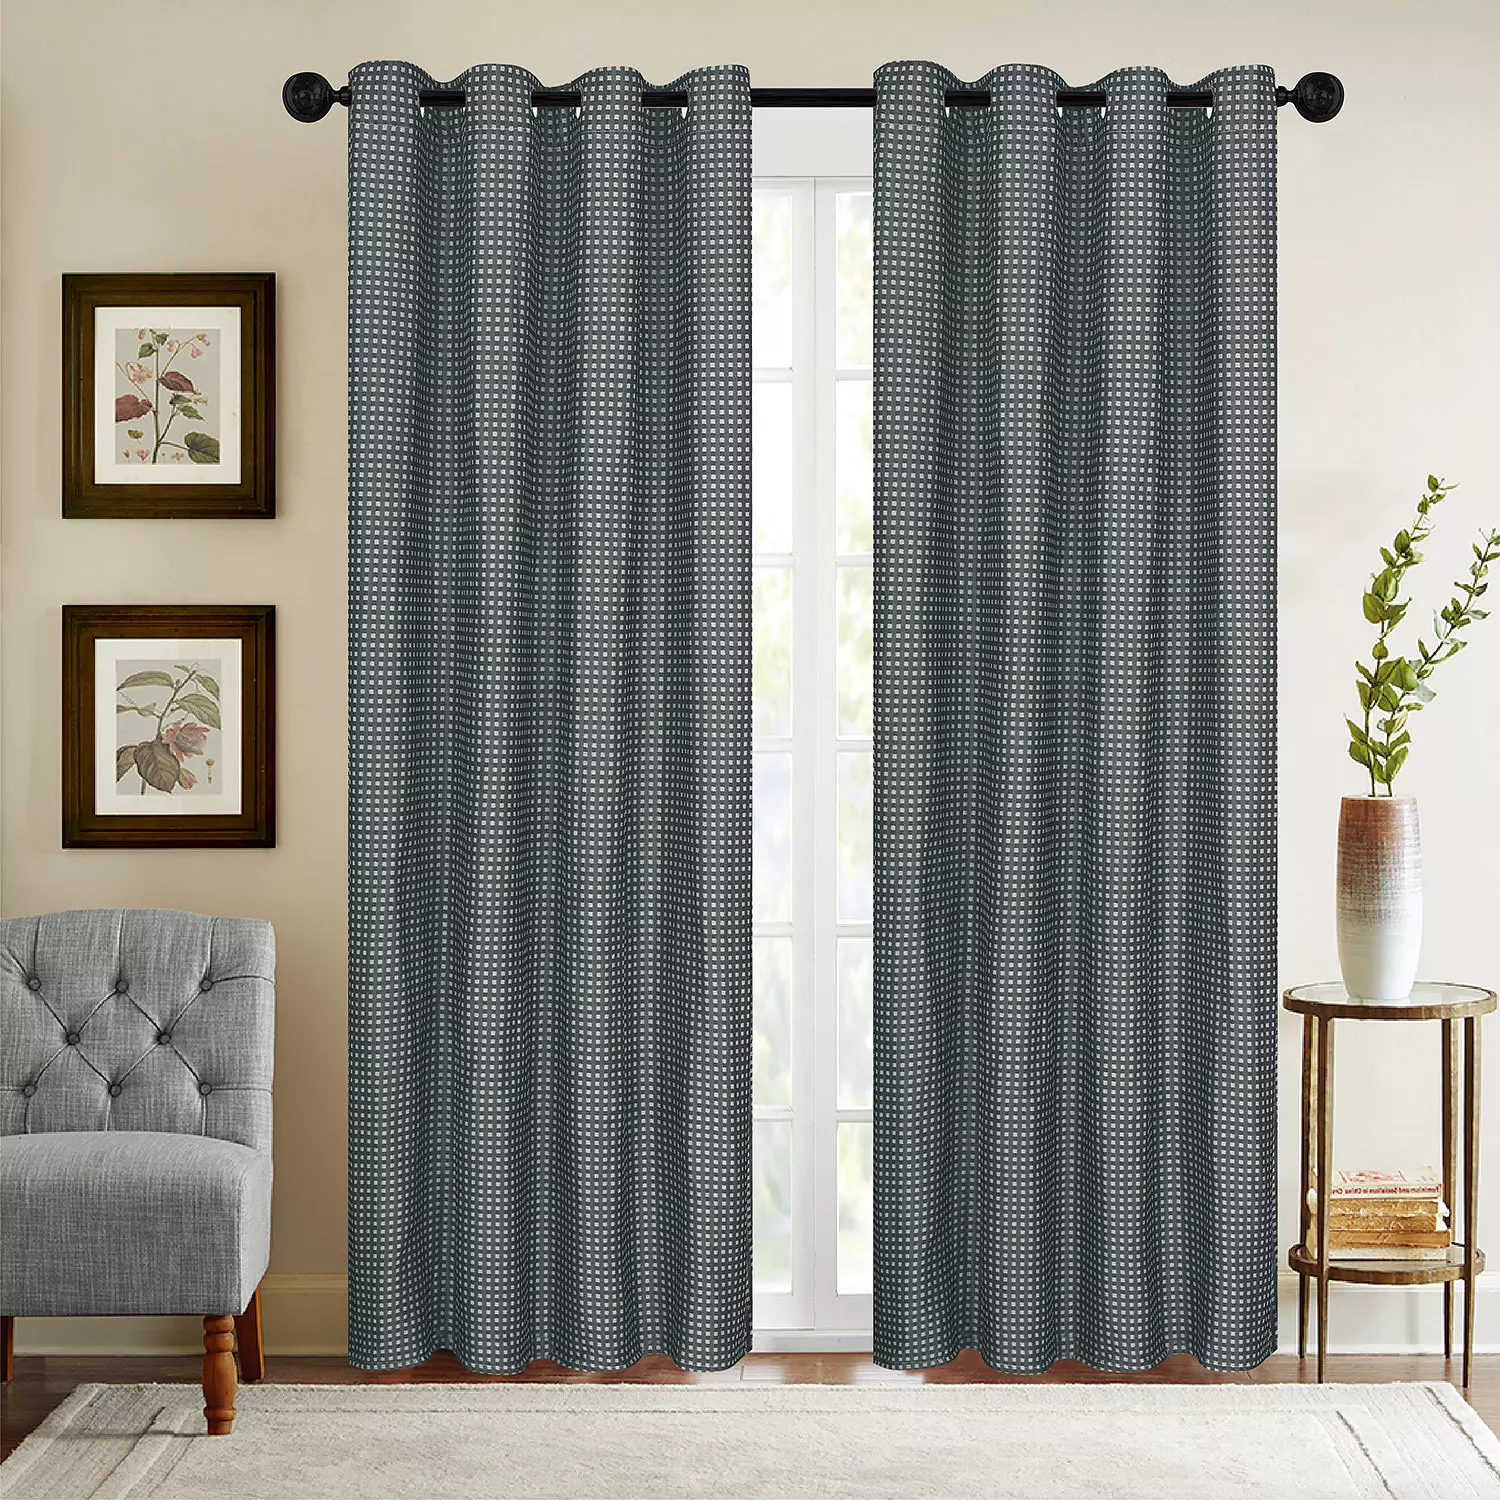 Metrico, jacquard panel with metal grommets in small grid pattern, 54"x84", dark grey